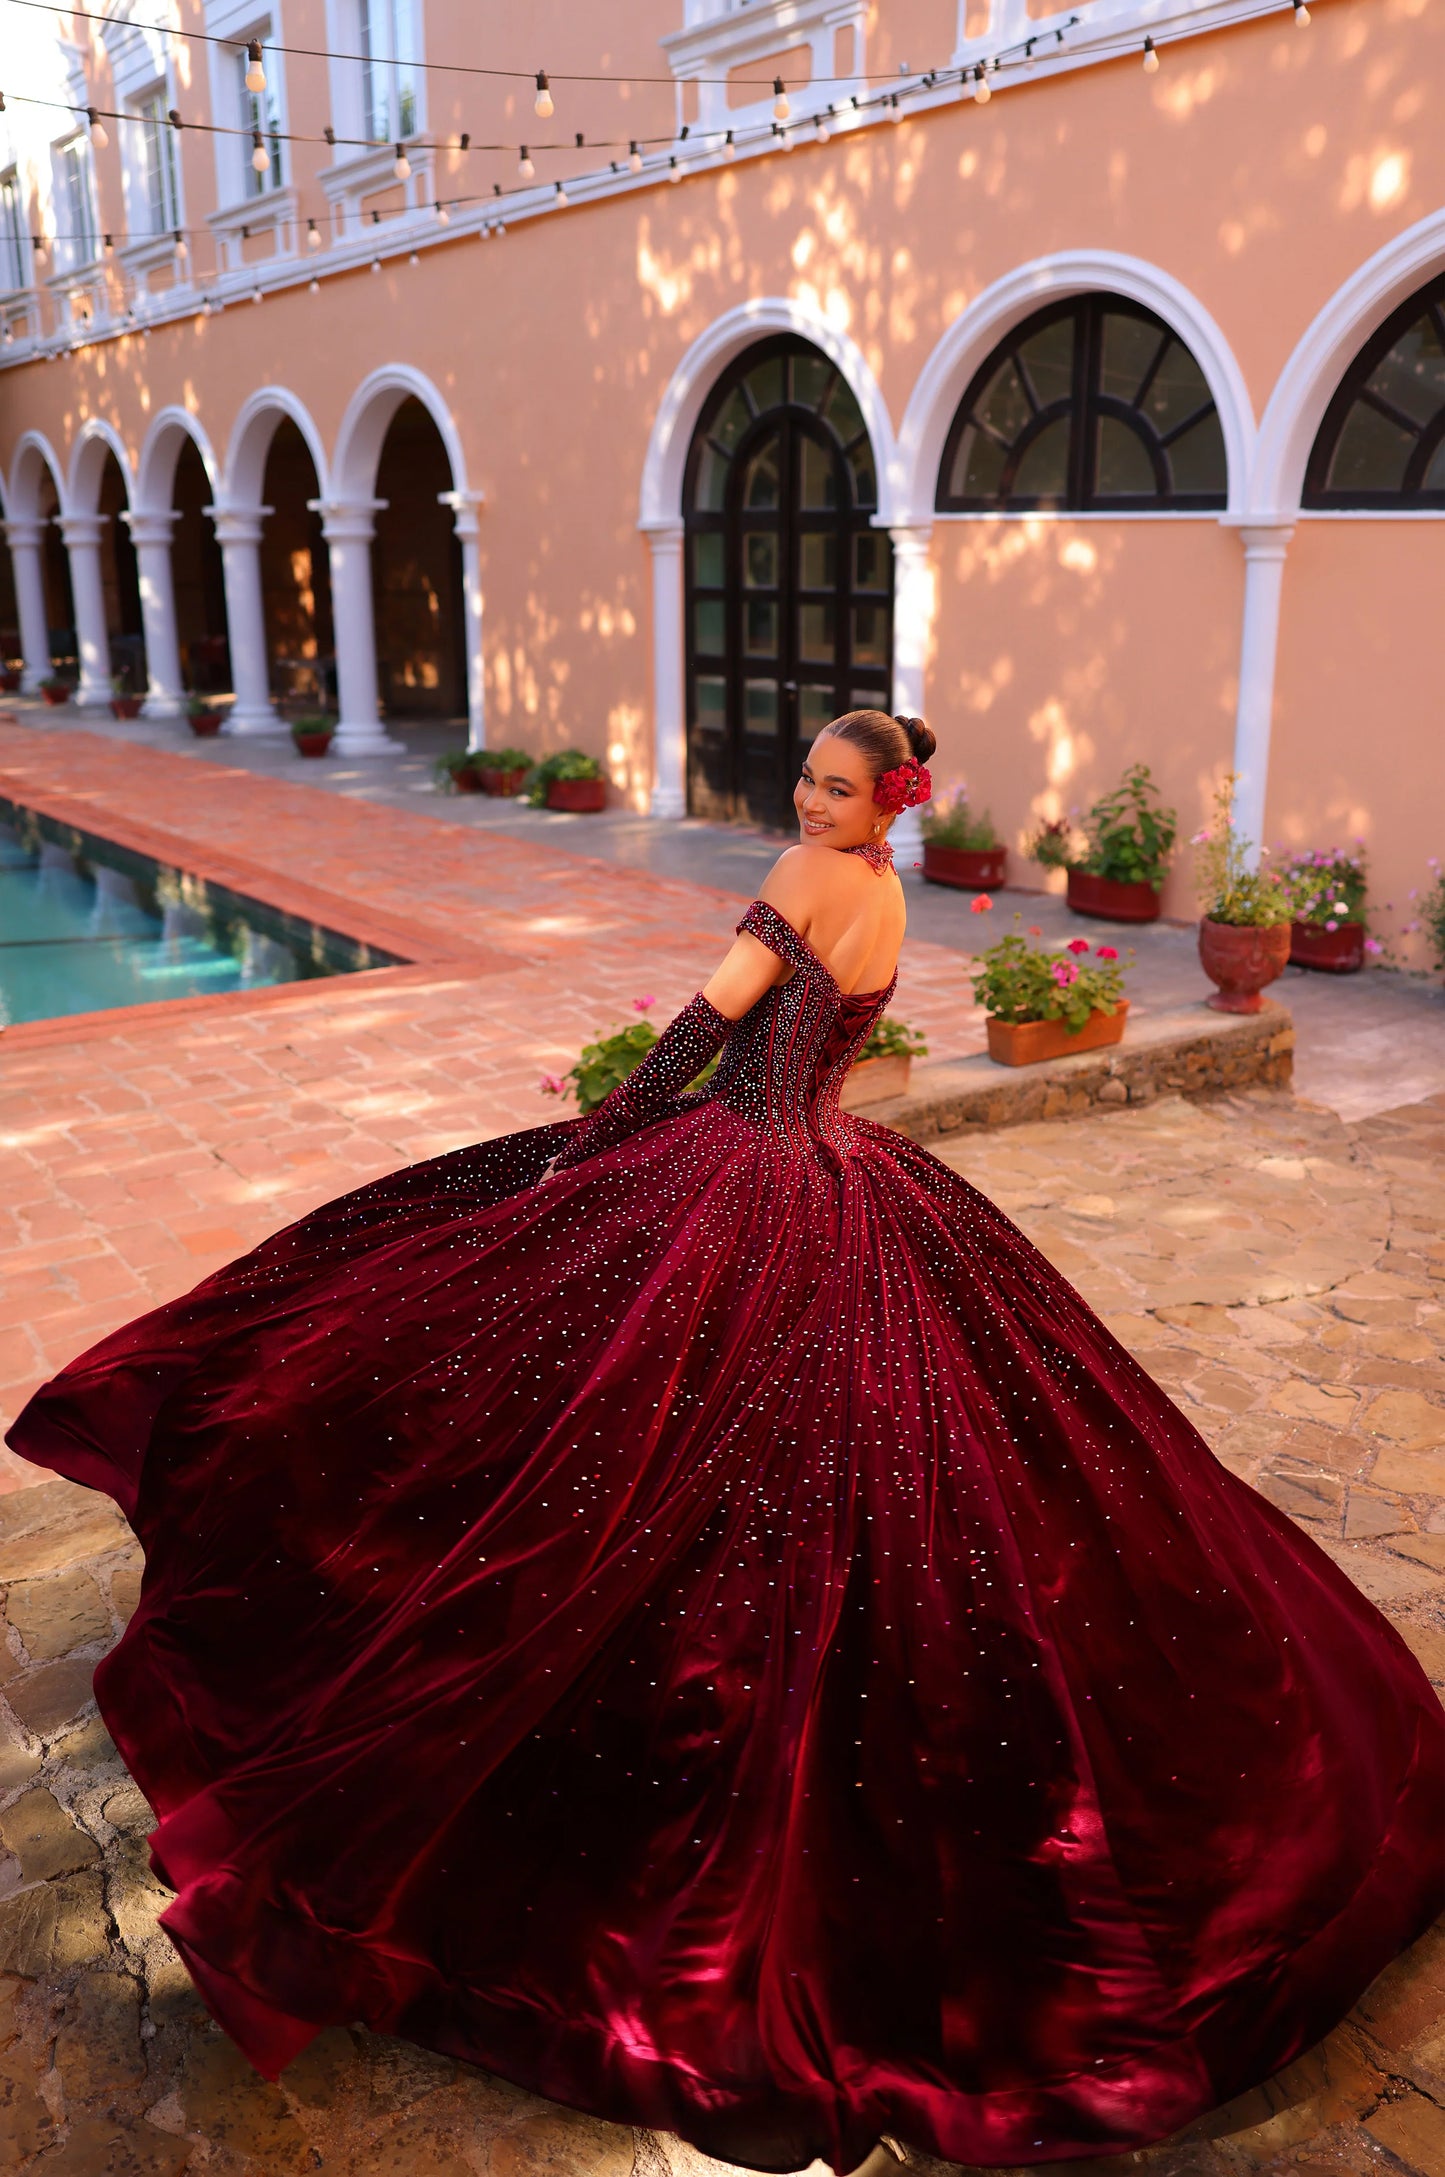 Elevate your quinceanera style with the luxurious Amarra 54257 dress. Made of velvet and adorned with crystal accents, it features a ball gown silhouette with an off-the-shoulder neckline. Complete the look with the included corset necklace and velvet gloves. A perfect choice for a night to remember.